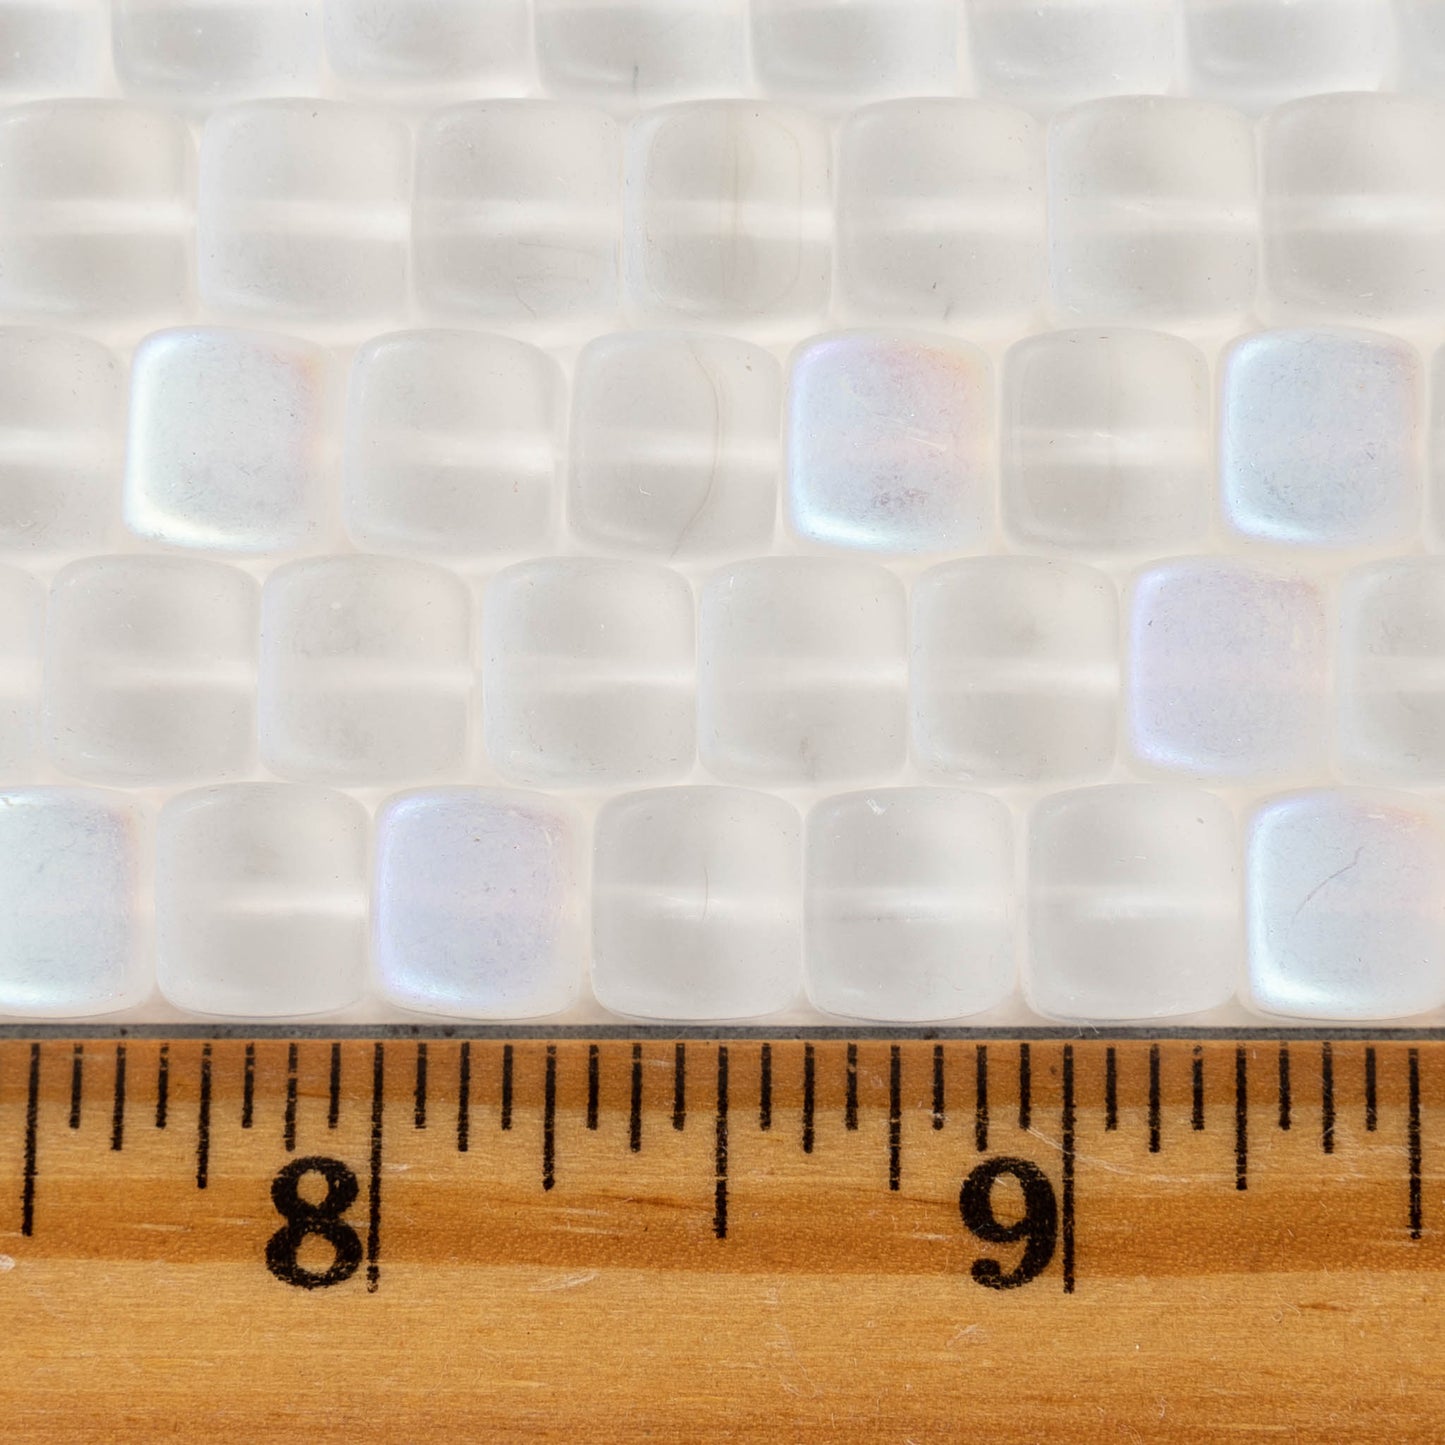 Load image into Gallery viewer, 11mm Glass Cube Beads - Crystal Matte AB - 25 beads
